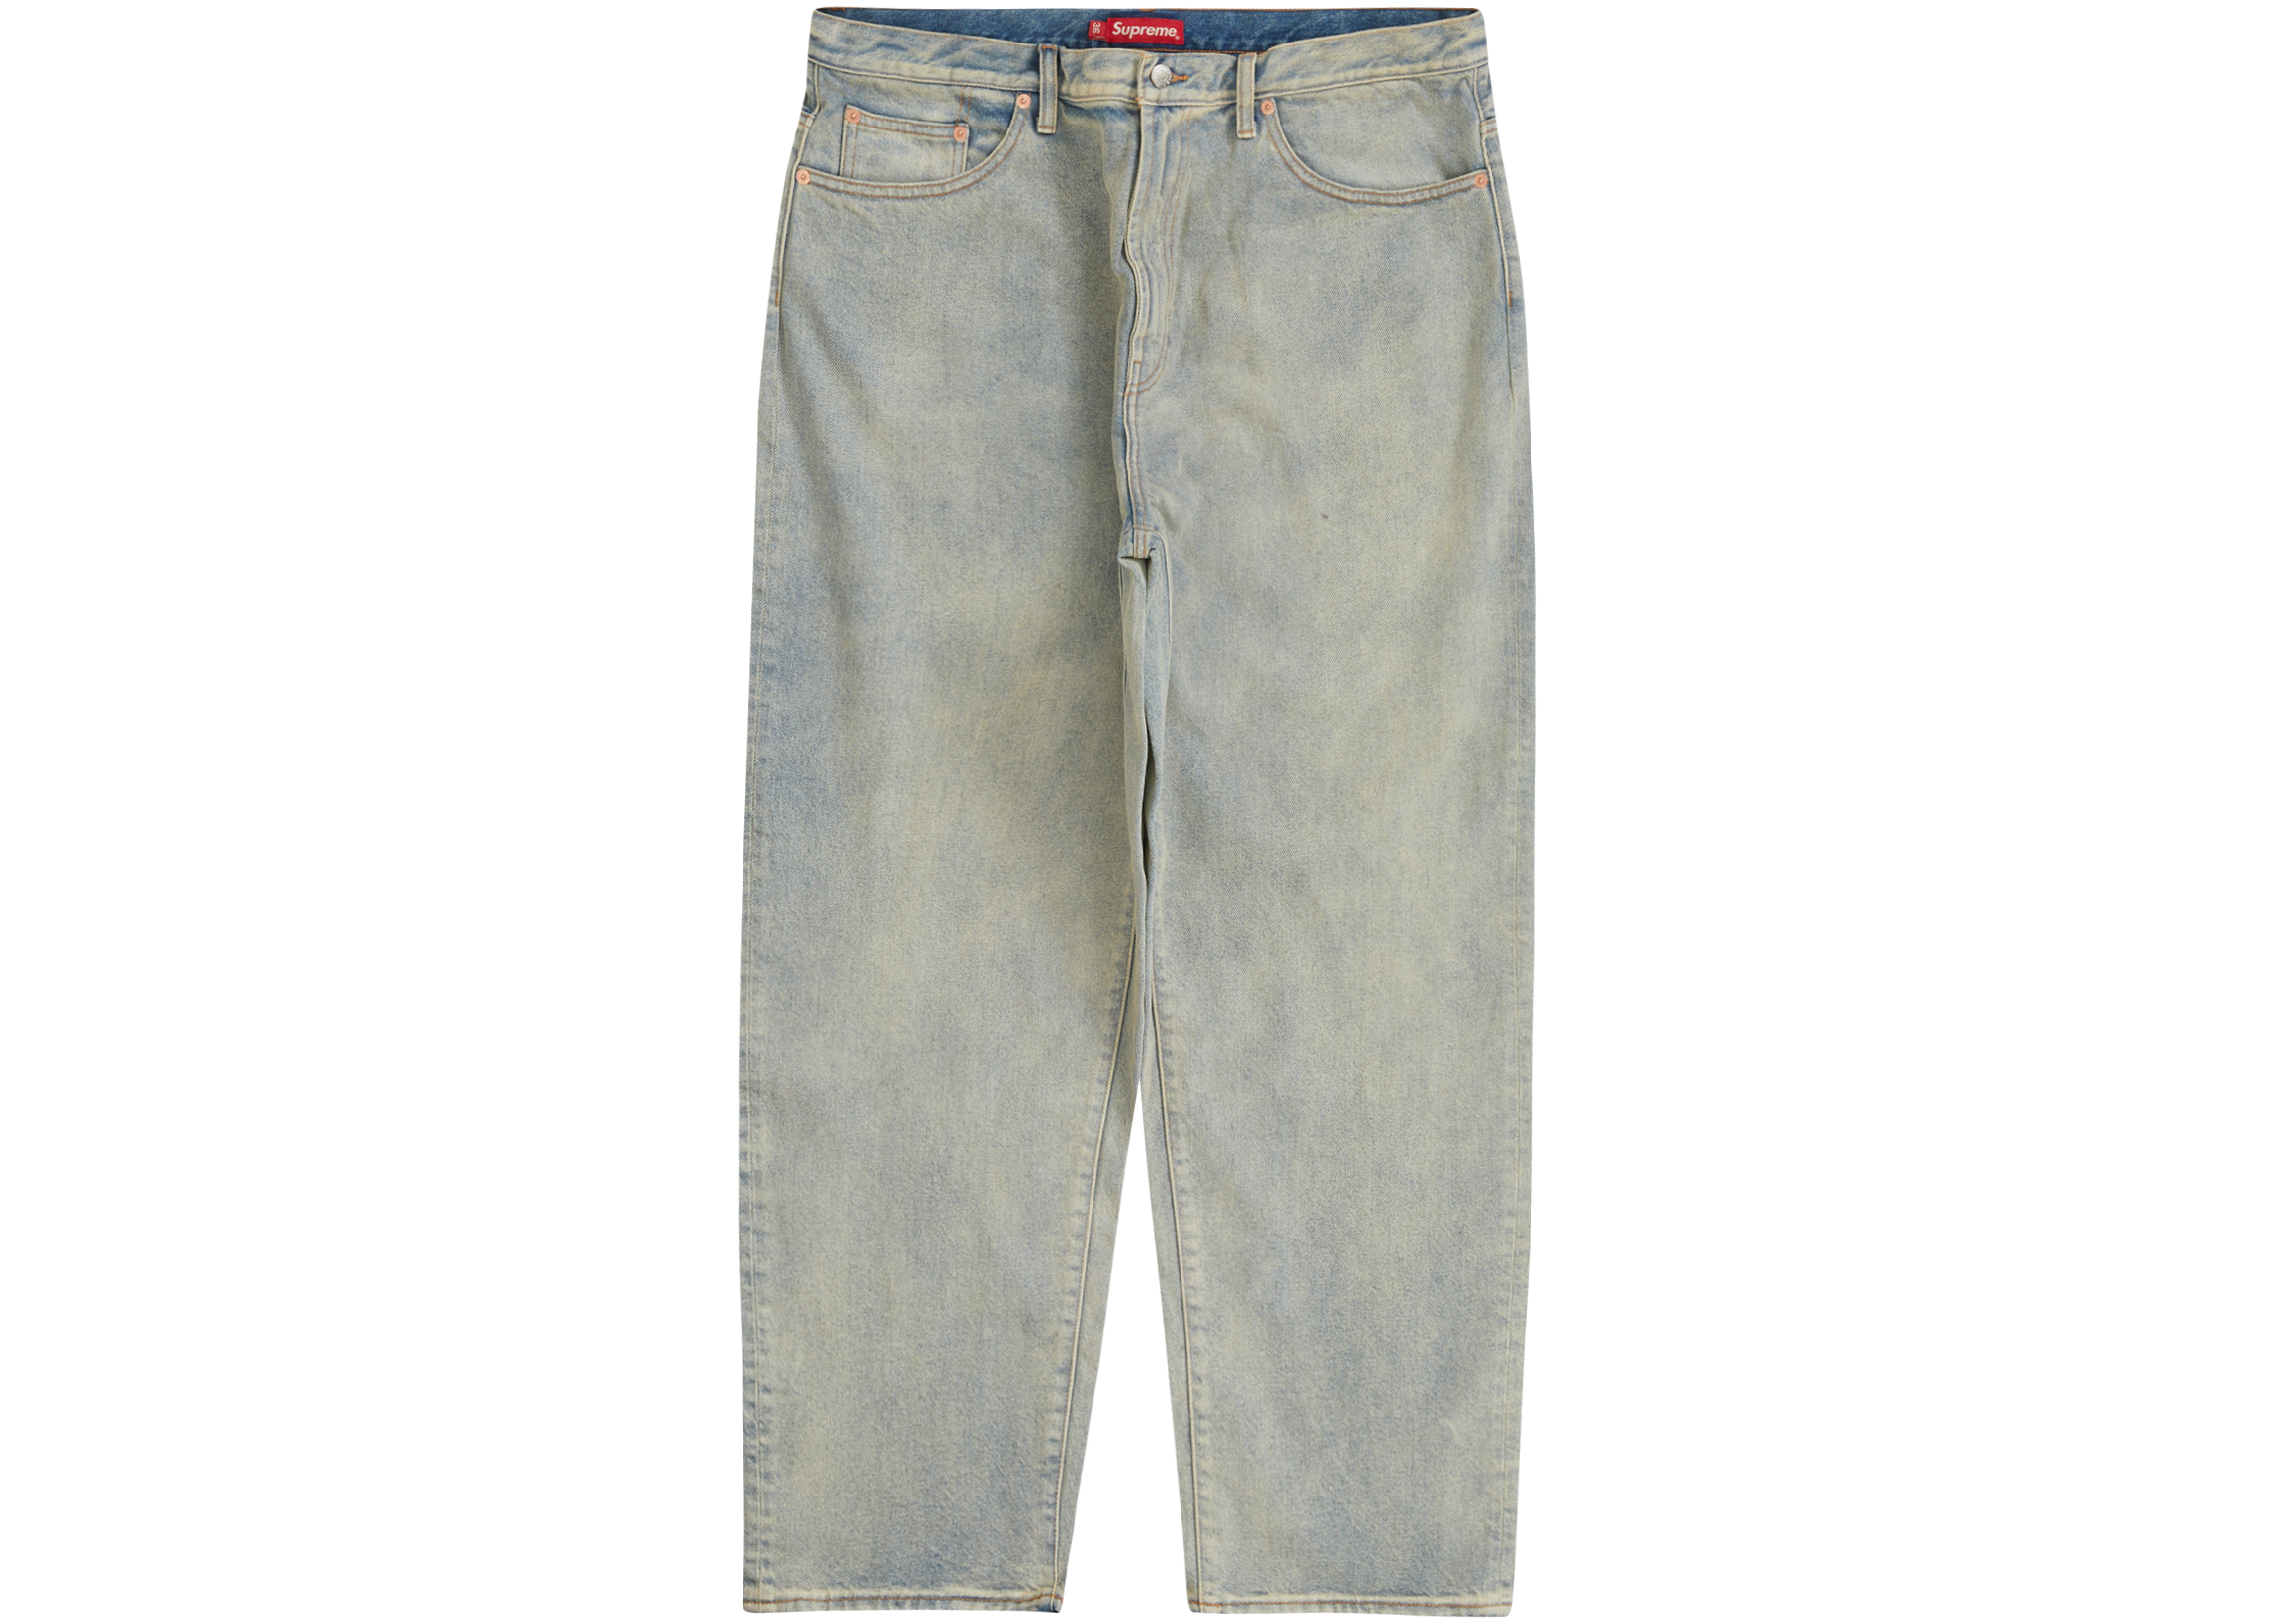 Supreme Baggy Jean Dirty Indig 30インチ-